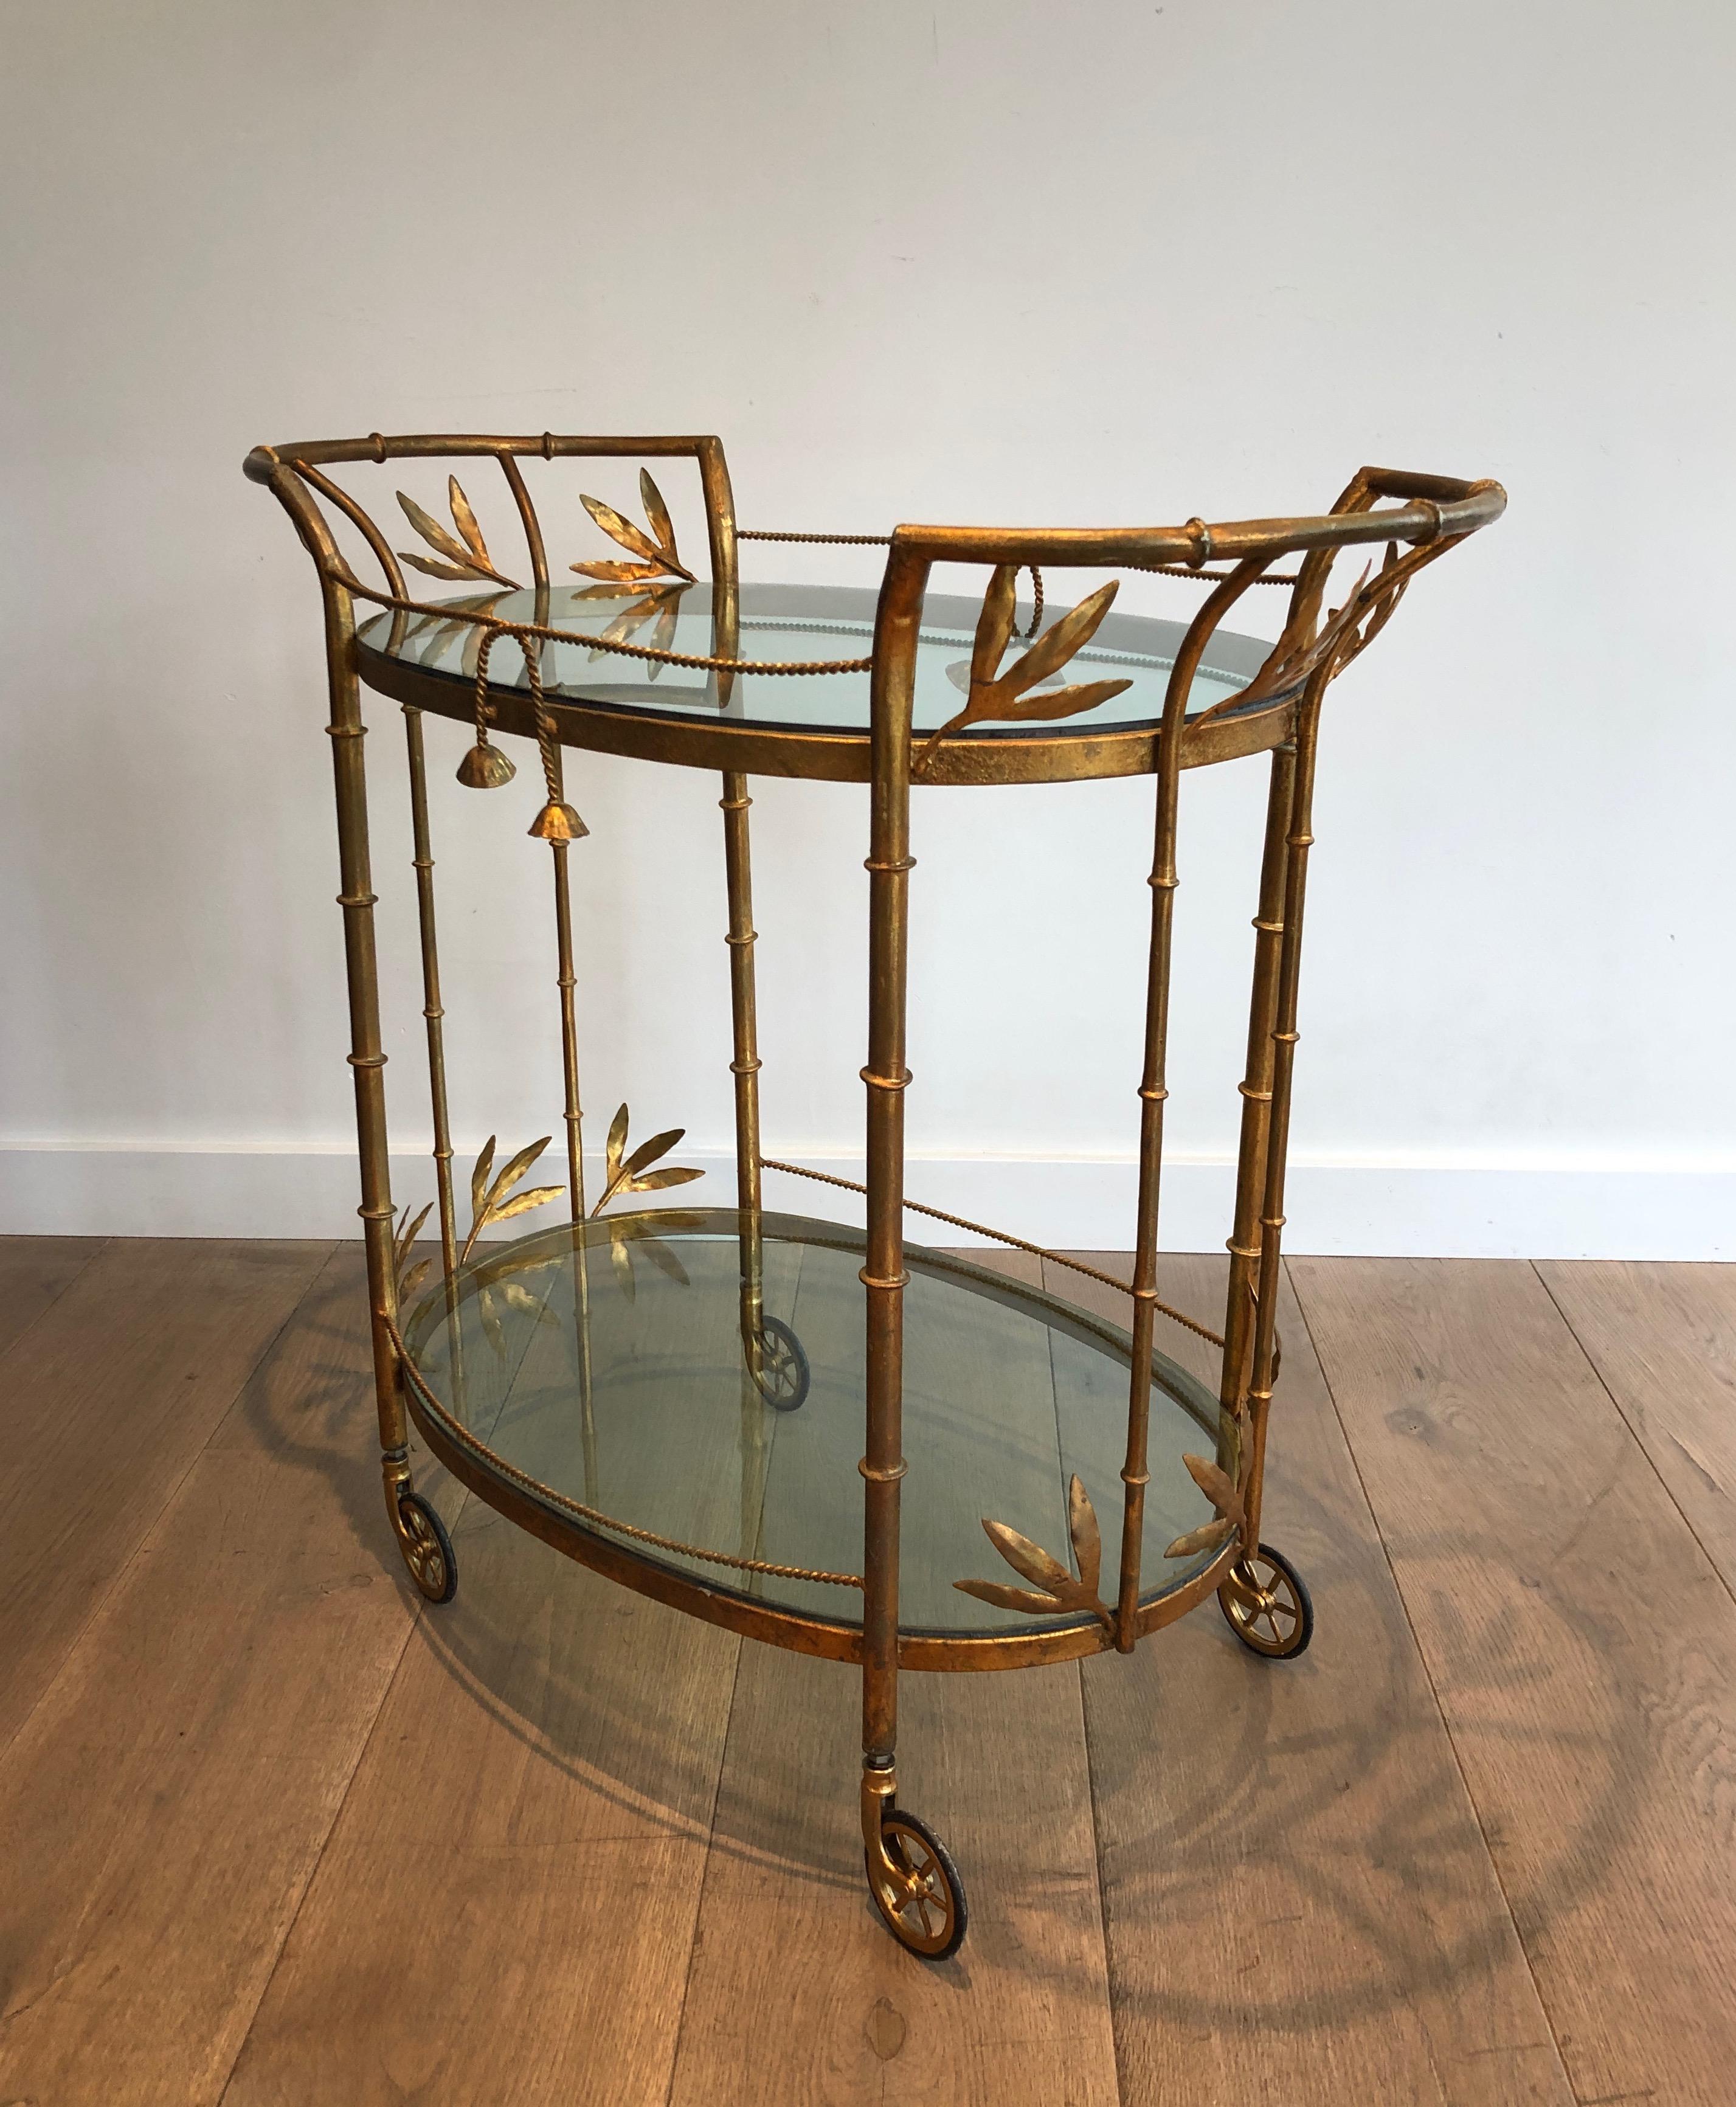 Late 20th Century Faux-Bamboo Gilt Metal Drinks Trolley. French work Attributed to Coco Chanel. 